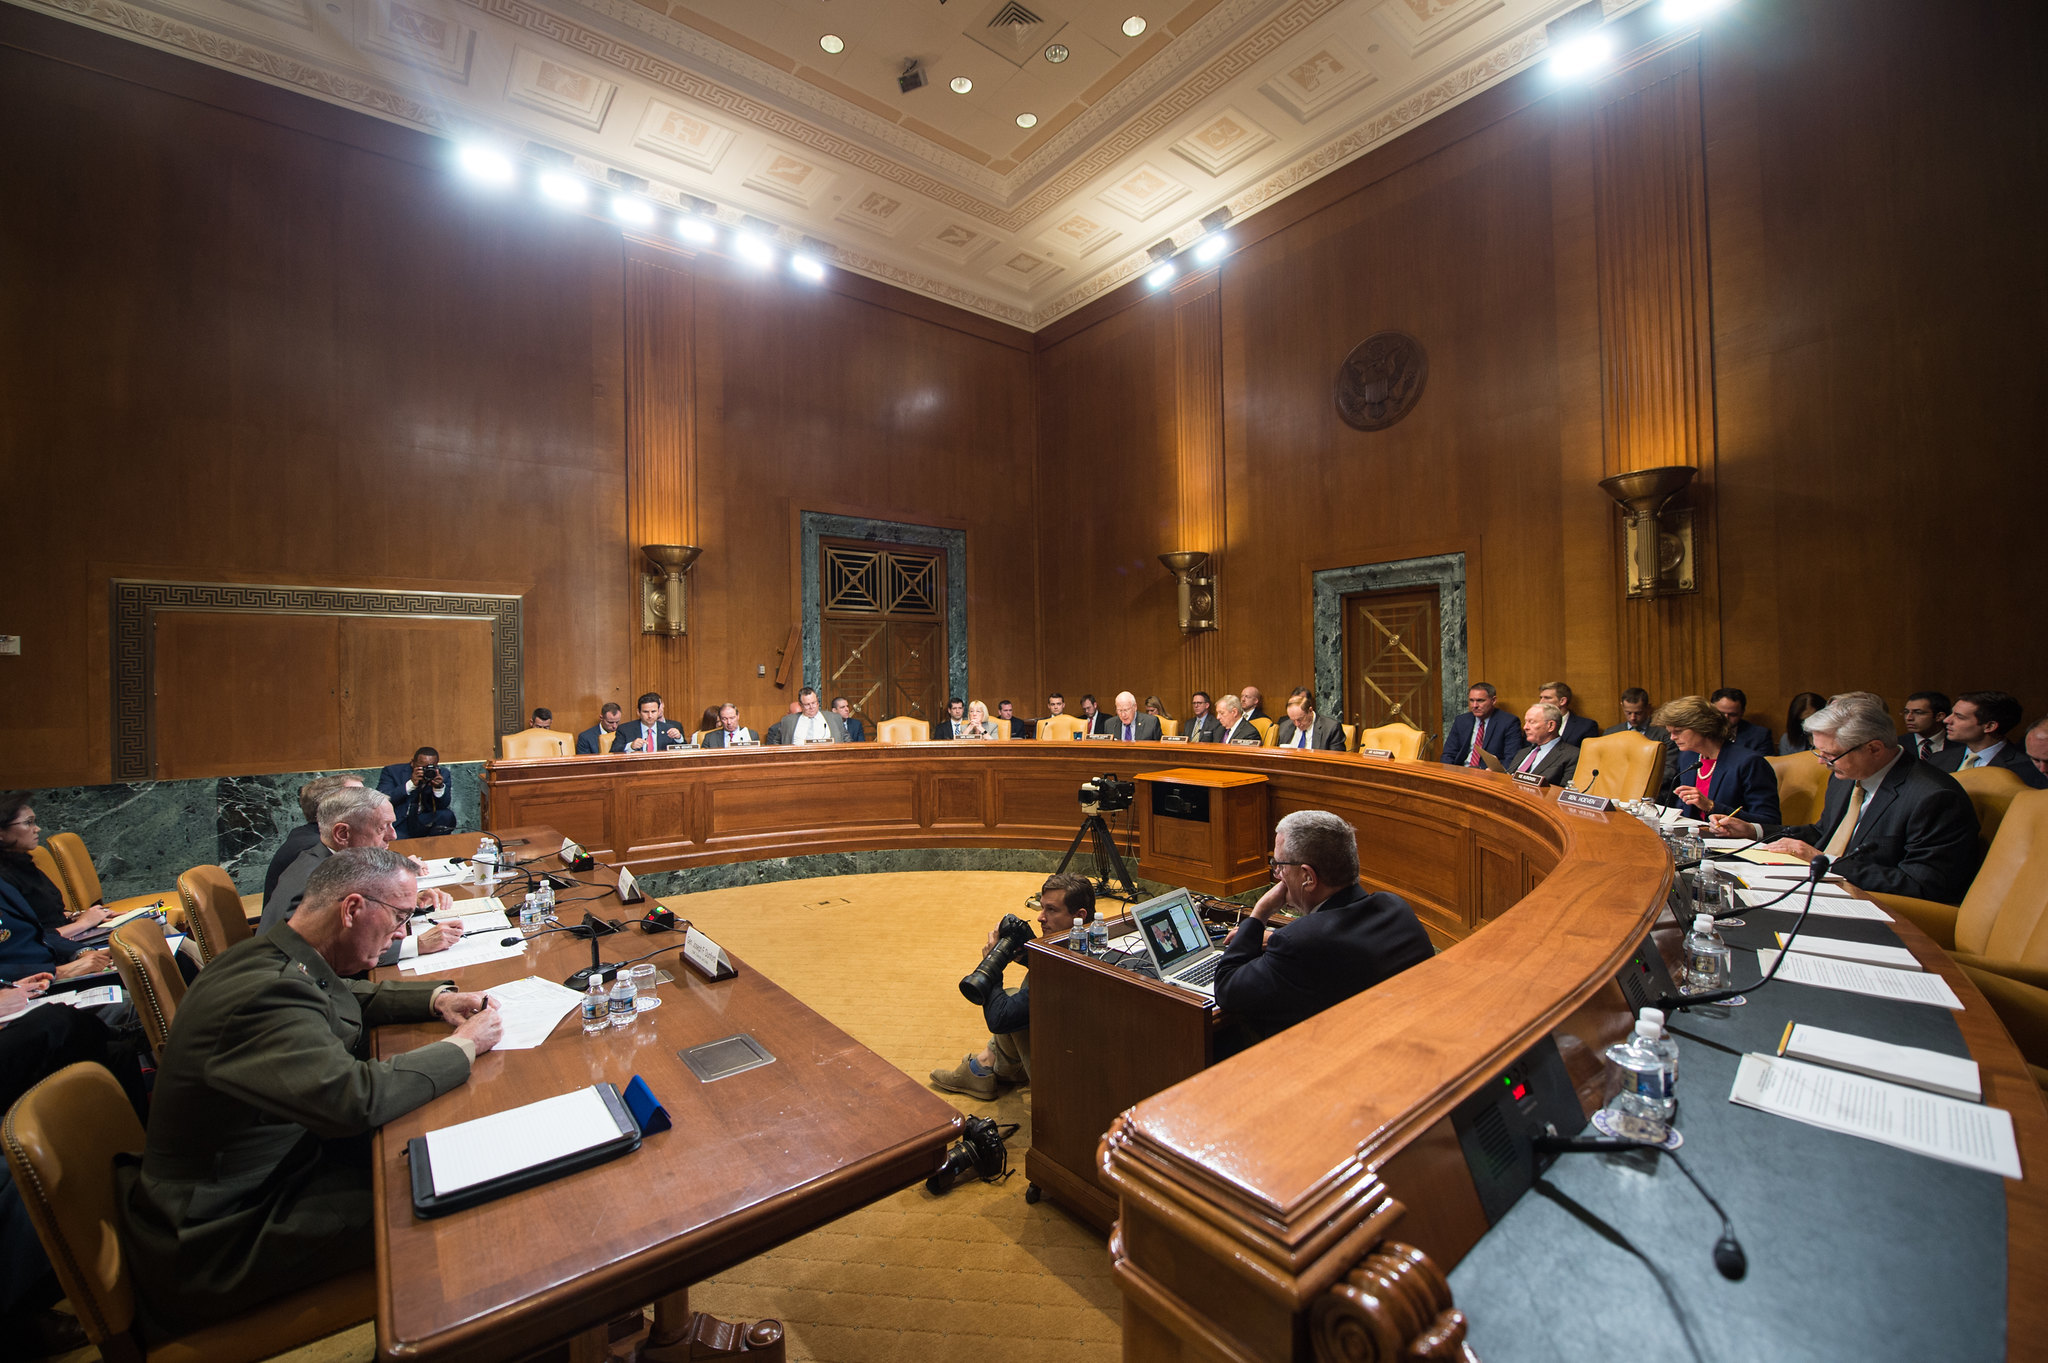 Senate appropriations committee hearing